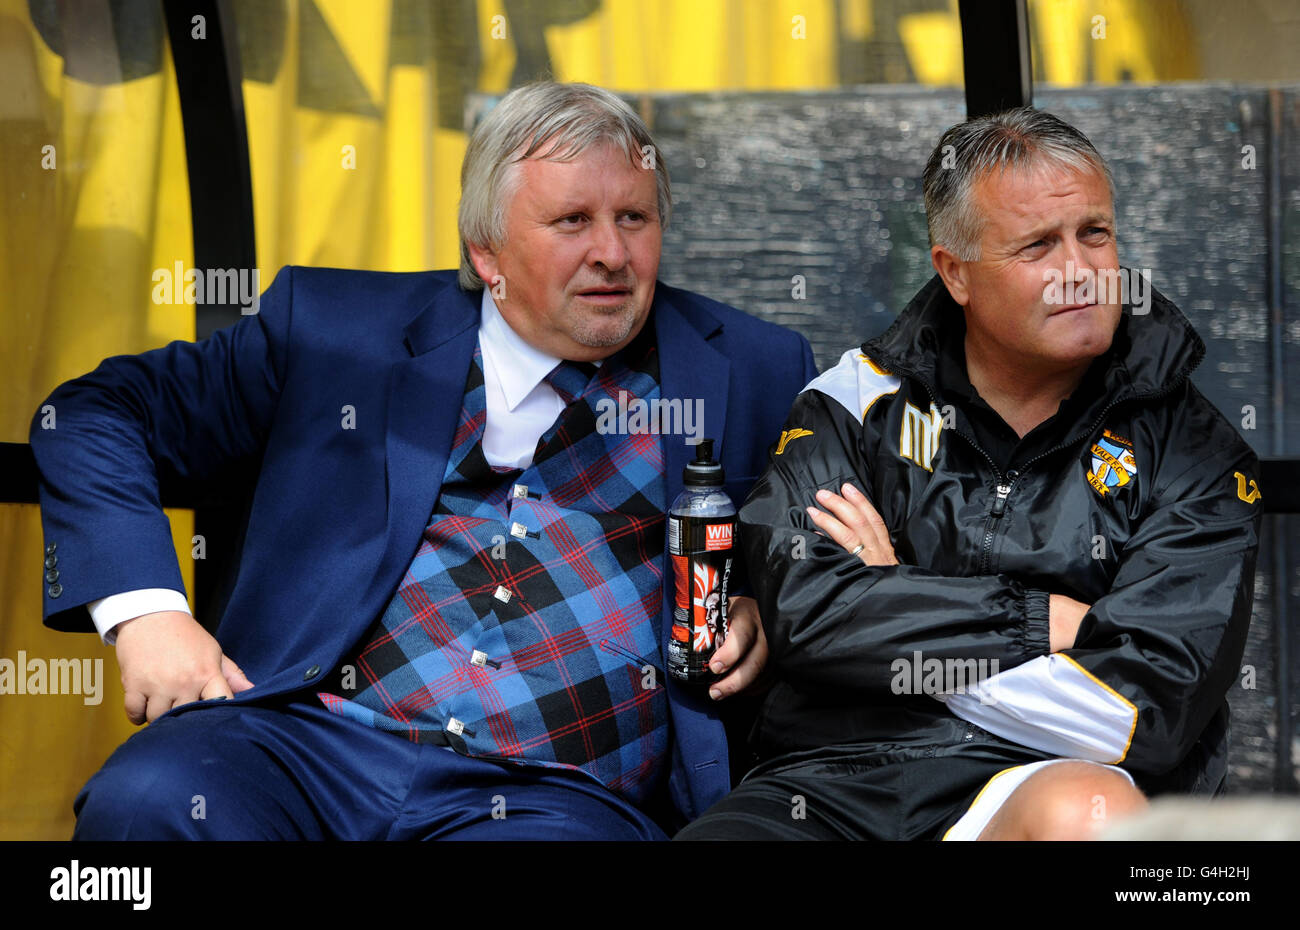 Port Vale manager Micky Adams (right) and Southend manager Paul Sturrock during the npower Football League Two match at Vale Park, Stoke On Trent. Stock Photo